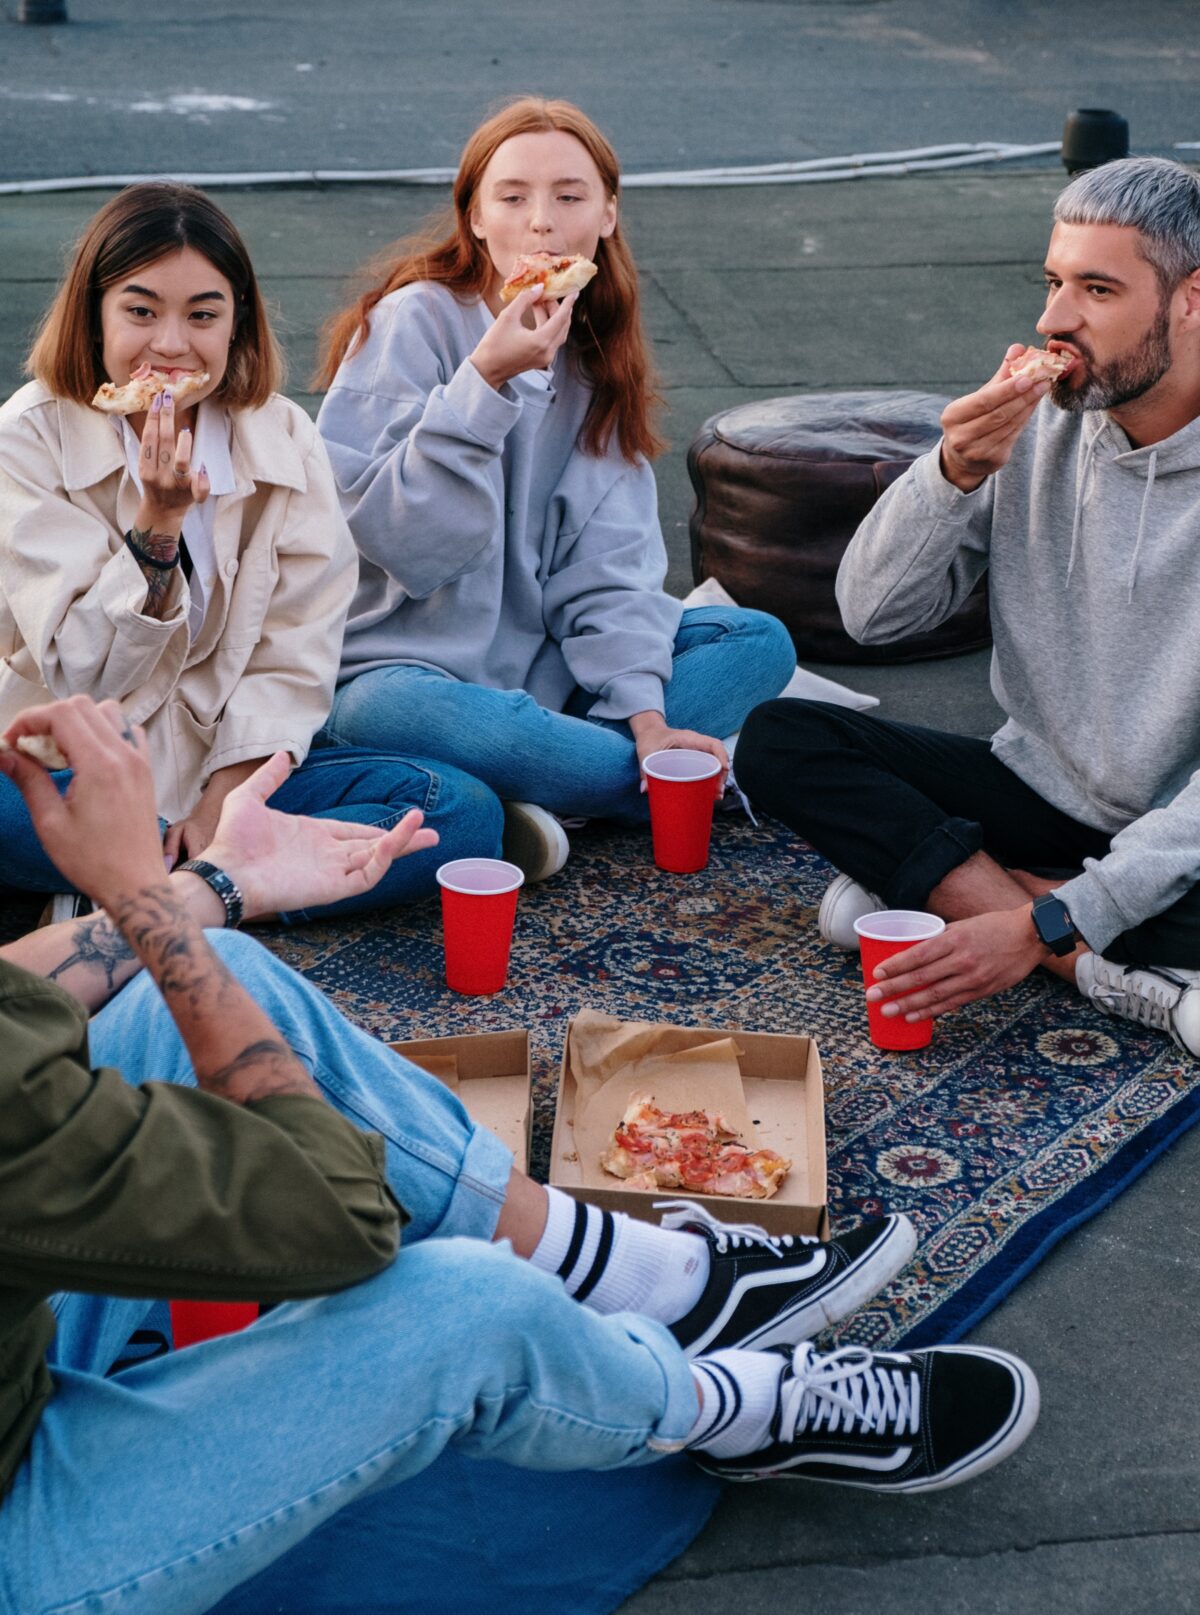 A group of young people eating pizza.